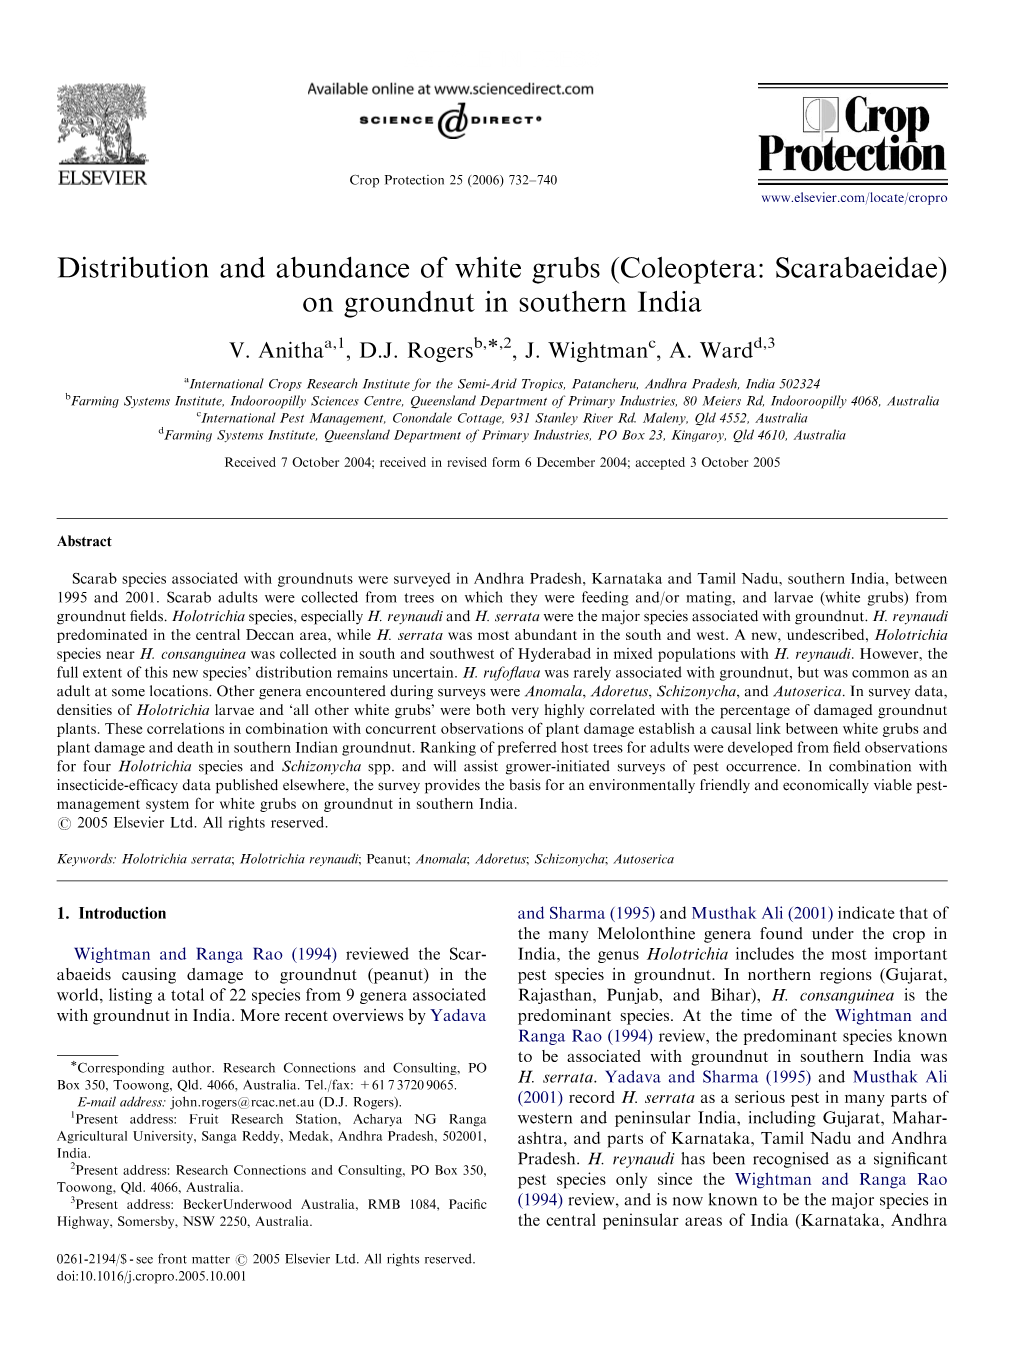 Distribution and Abundance of White Grubs (Coleoptera: Scarabaeidae) on Groundnut in Southern India